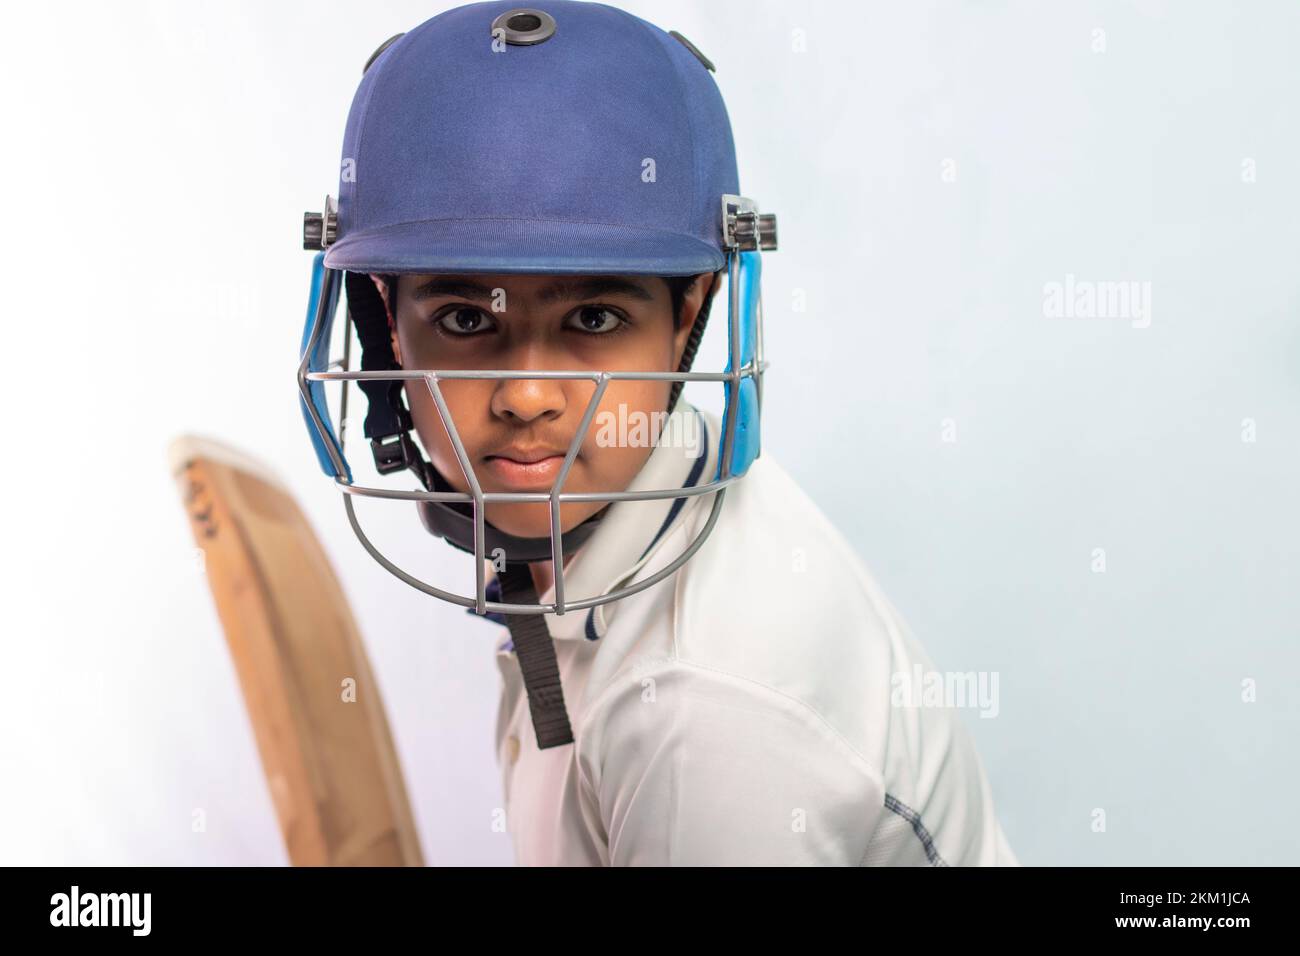 Portrait of boy getting ready to strike During a Cricket Game Stock Photo